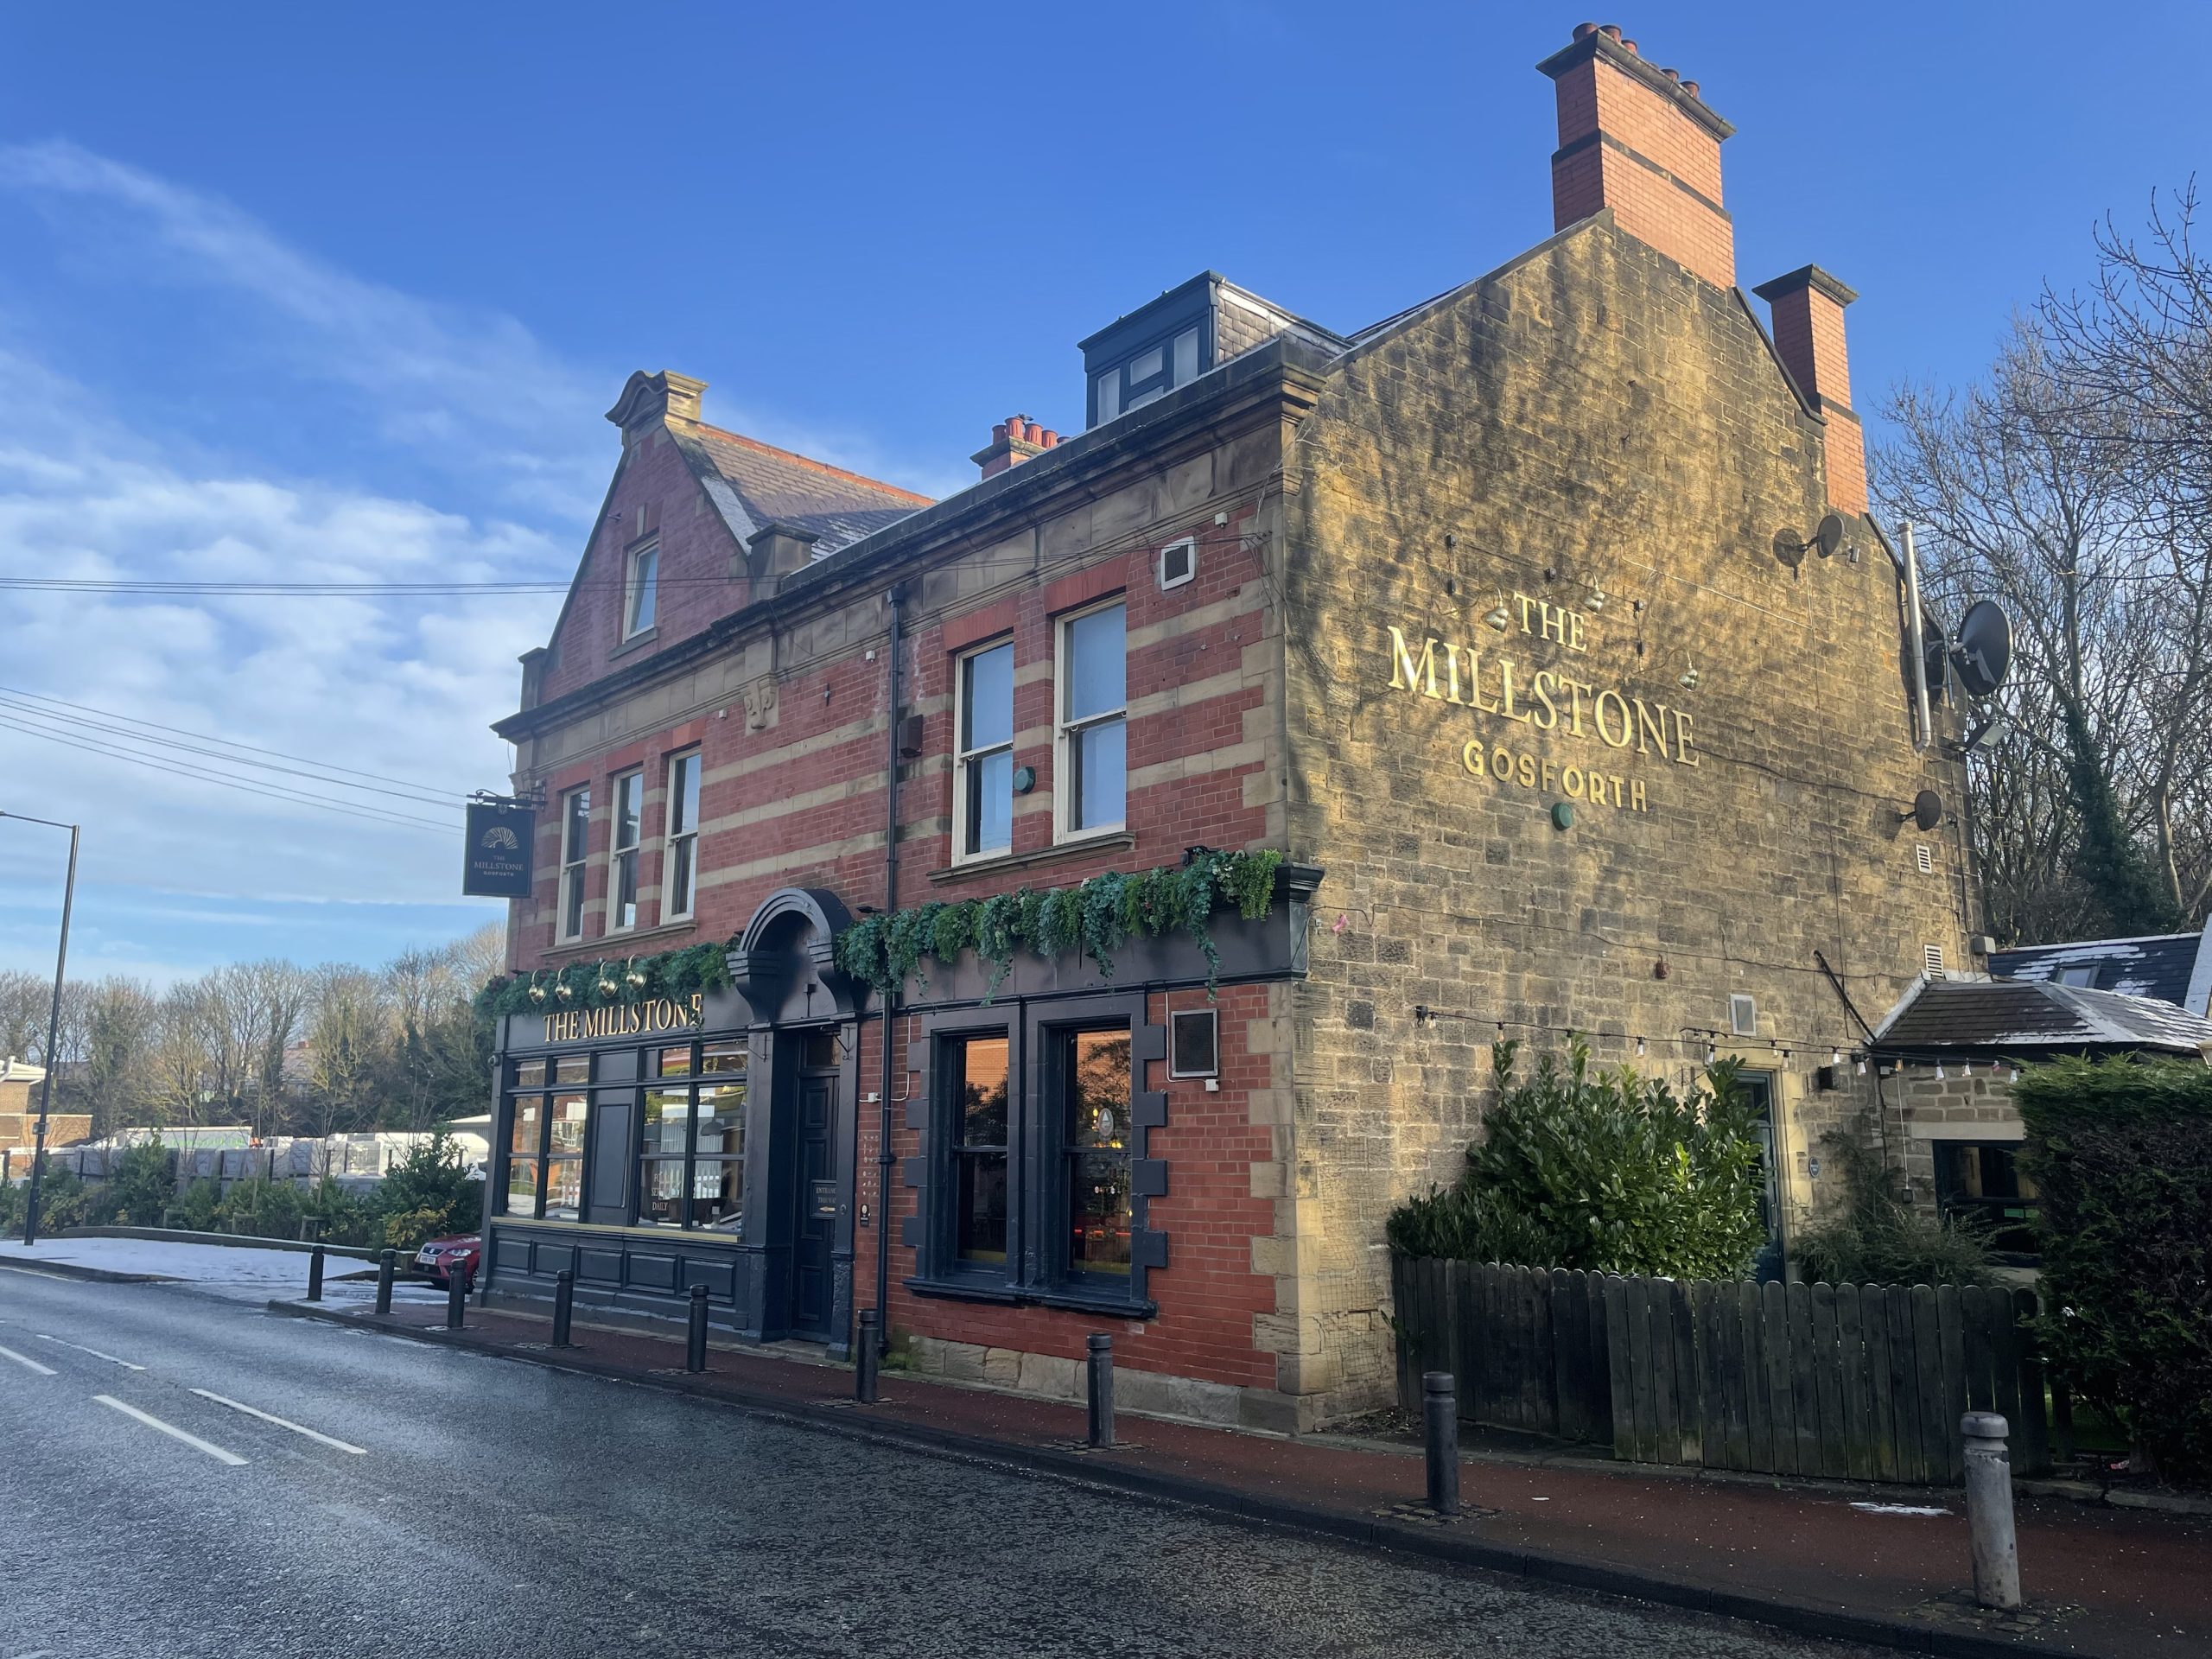 Watling Real Estate The Millstone scaled Avison Young and Watling Real Estate appointed to market 25 pub portfolio in the North-East and Yorkshire